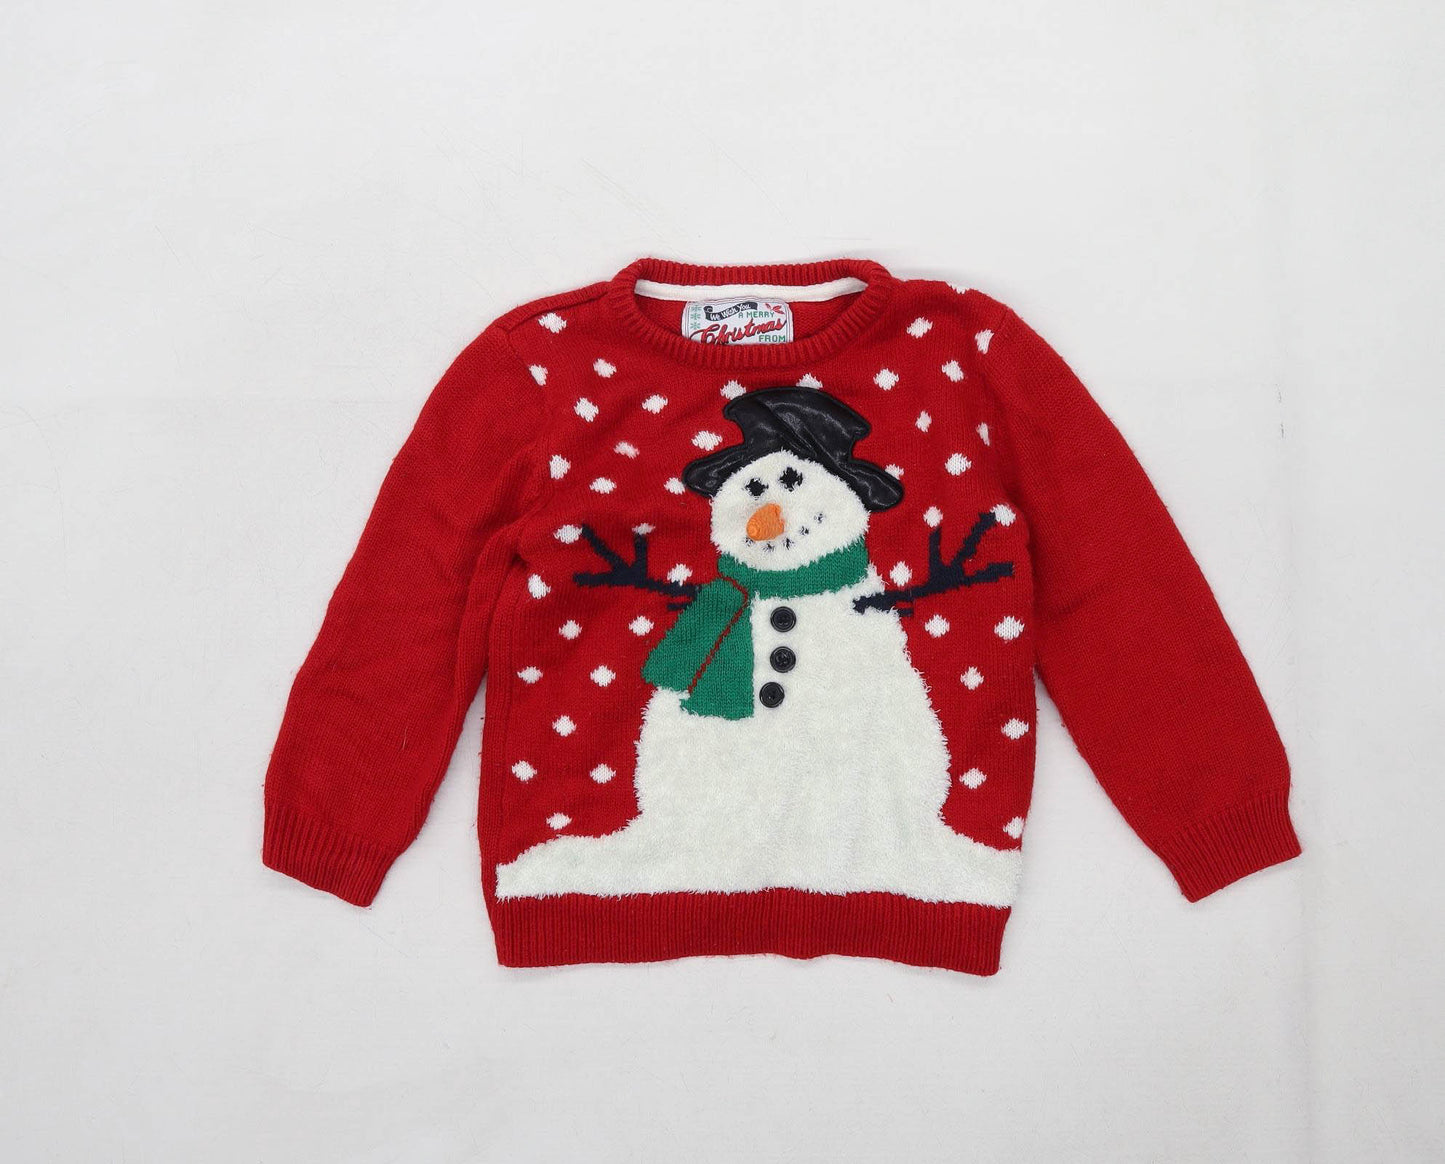 Rebel Girls Graphic Red Christmas Snowman Jumper Age 4-5 Years